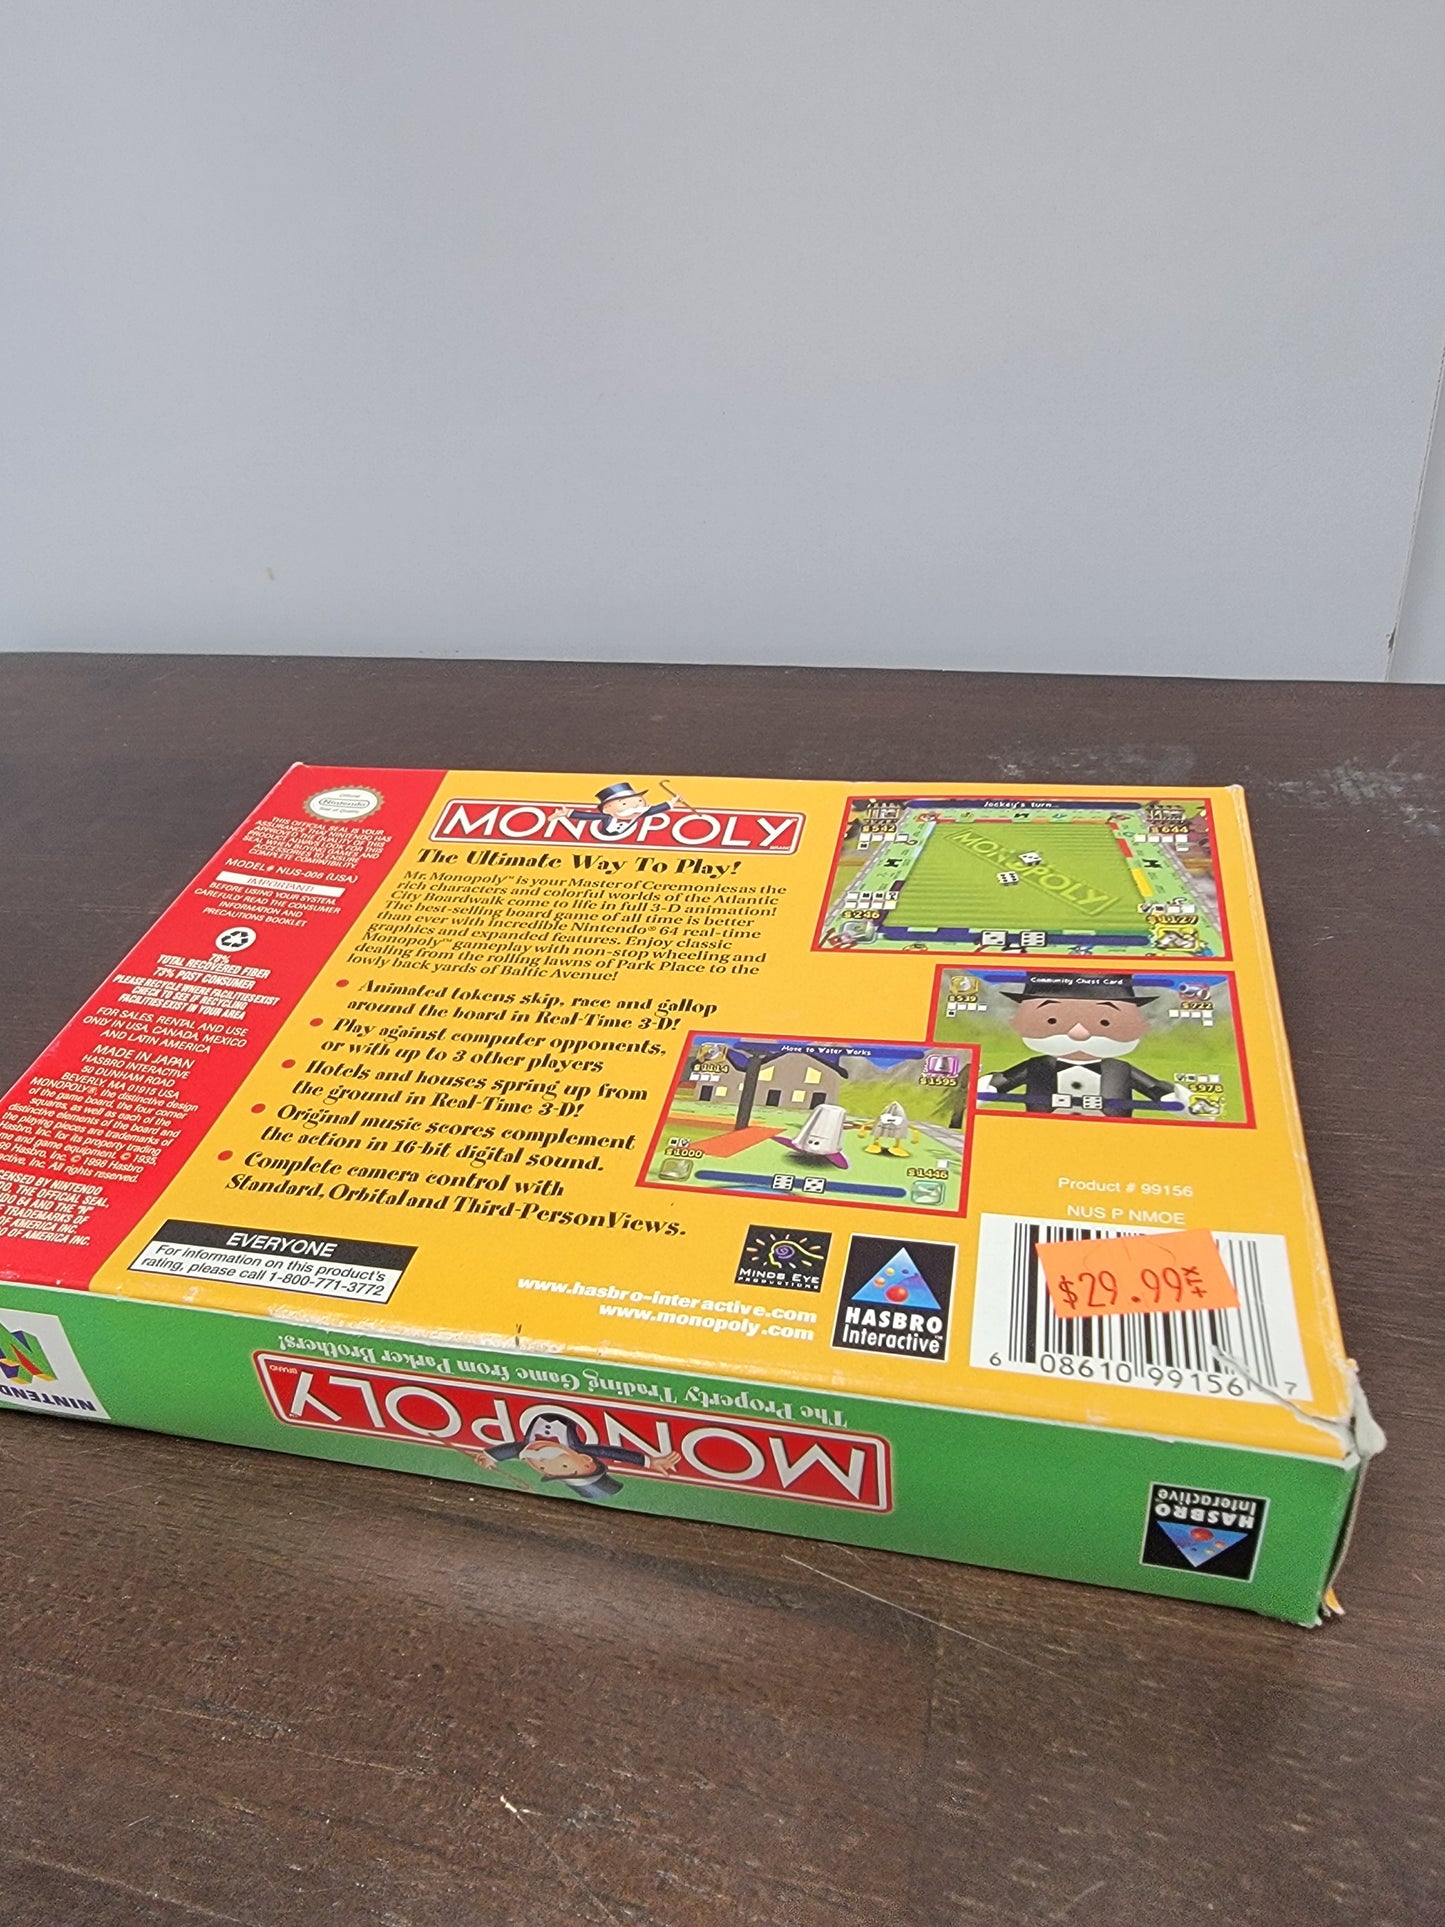 Monopoly Nintendo 64 BOX and MANUAL ONLY